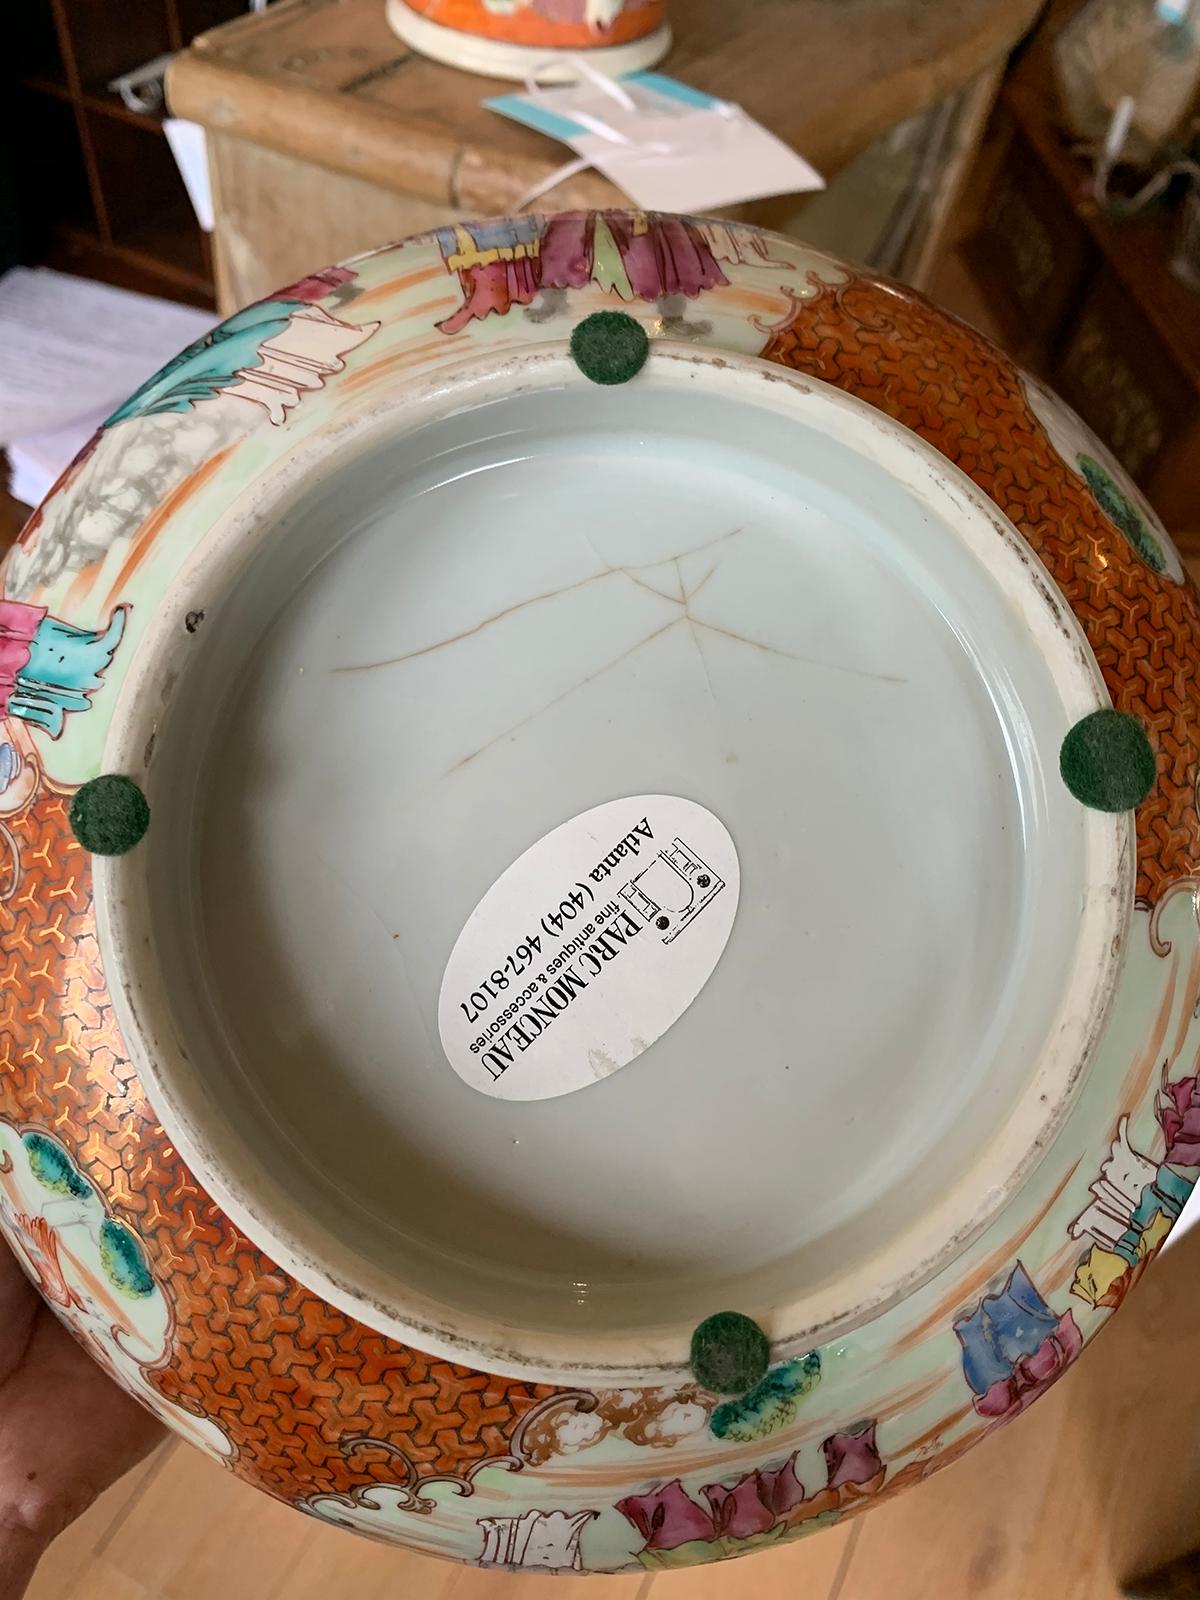 18th-19th century Chinese export porcelain punch bowl, unmarked.